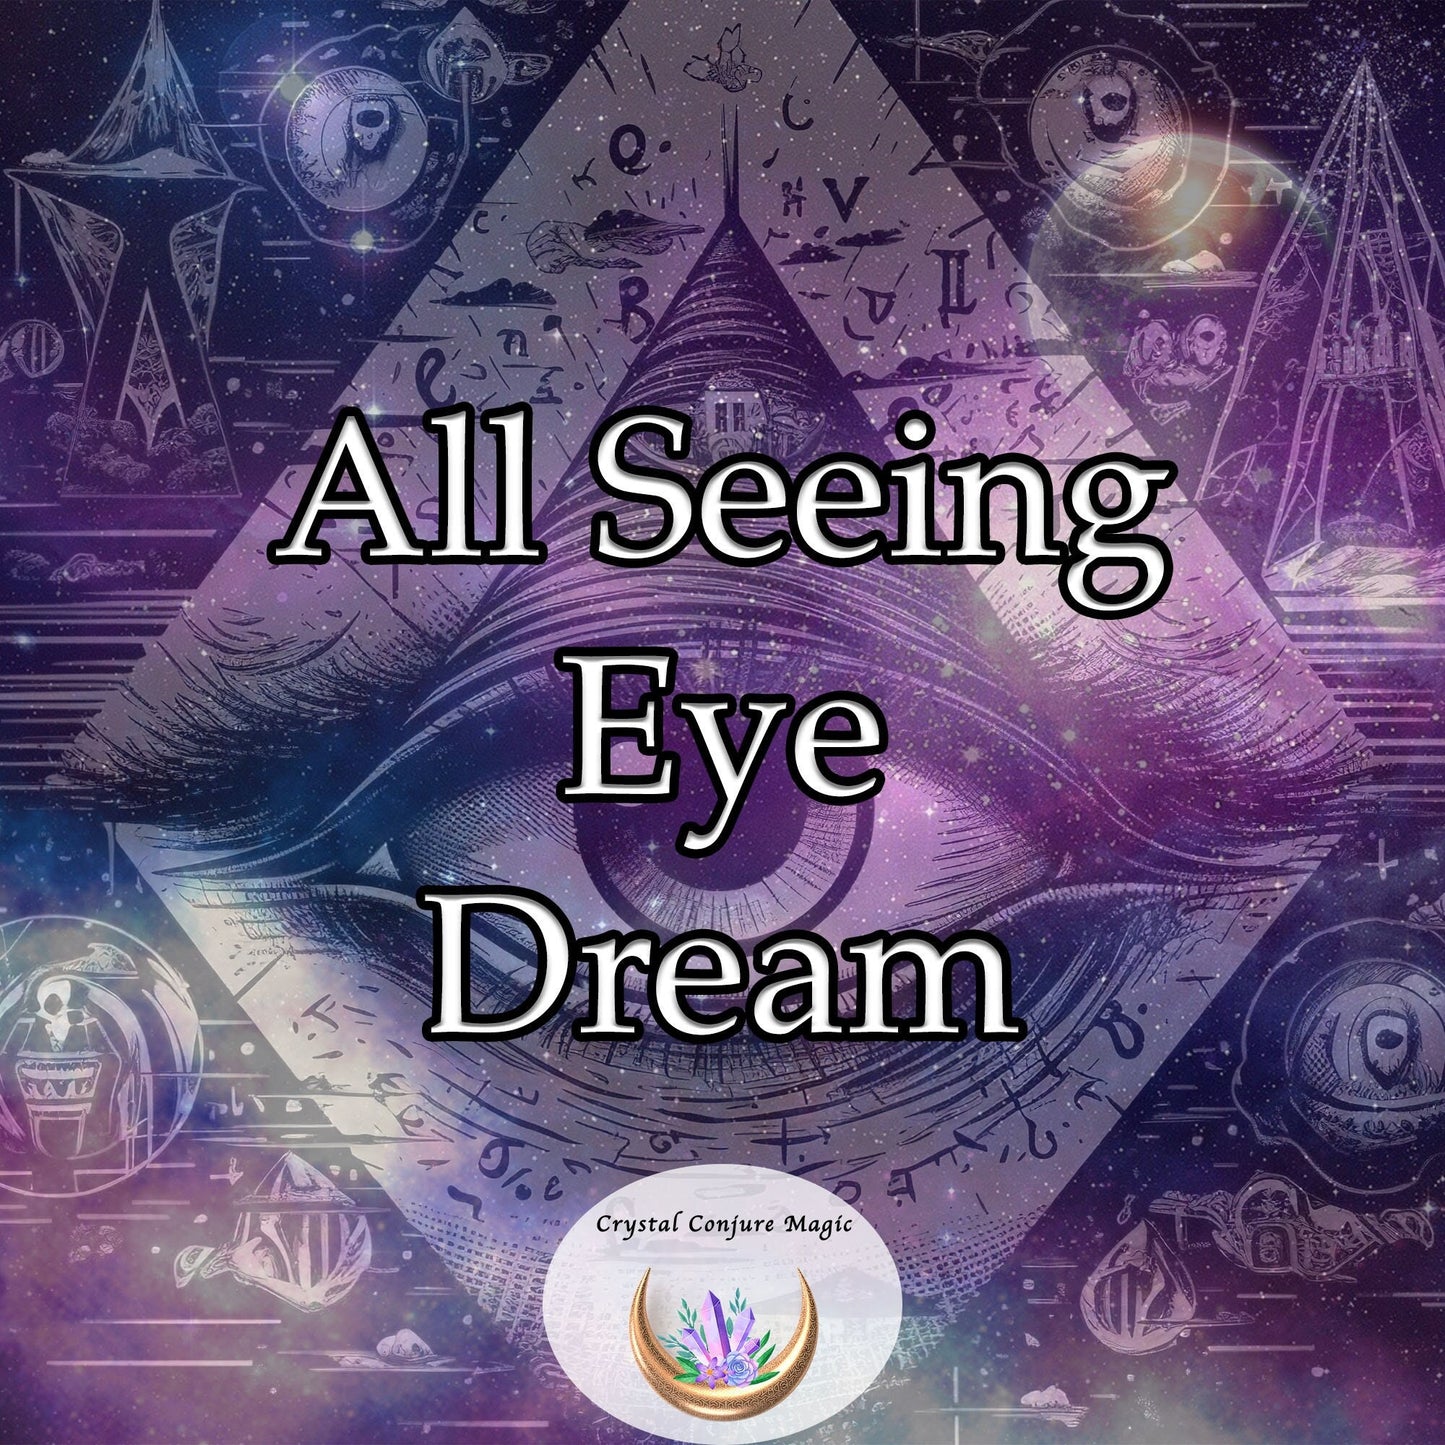 All Seeing Eye Dream - Dream your way to clear sight and a heightened sense of intuition, allowing you to see through deception